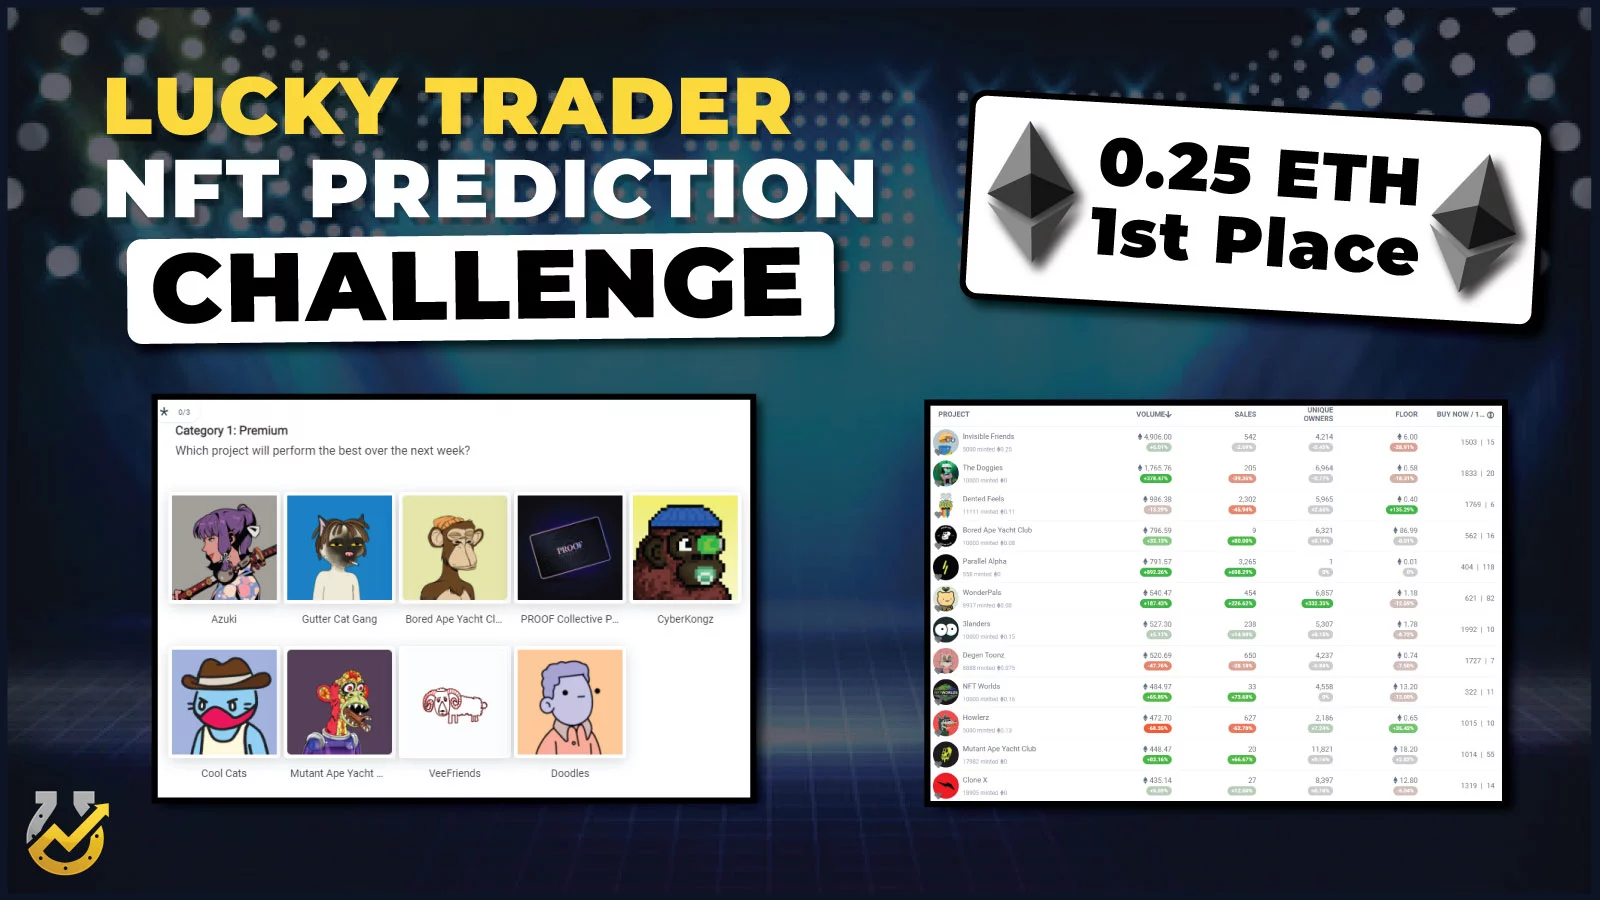 Introducing the Lucky Trader Price Prediction Challenge!